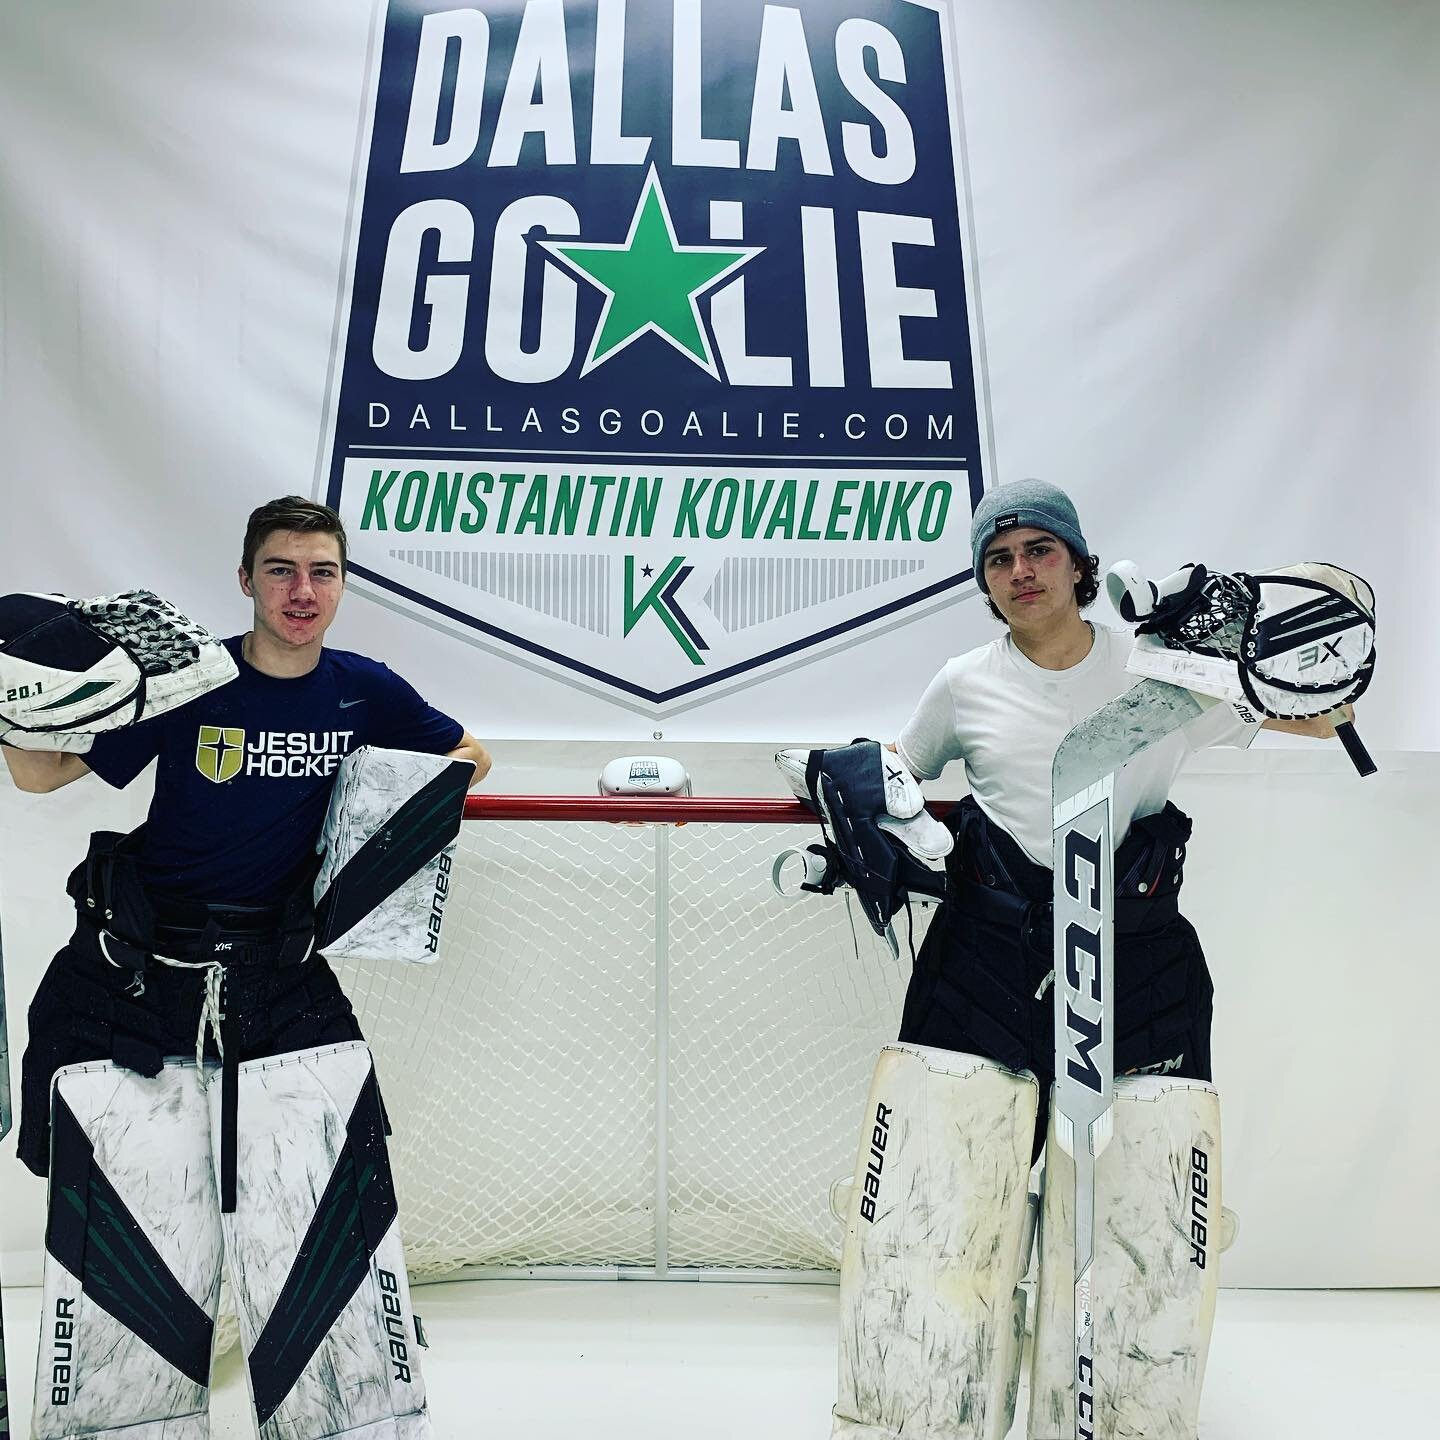 Had a blast working today with @drew_zang32 and @adenzirogiannis3006 using @sensearena 
The boys are loving it already improving! 
Have you tried yet? If so, let us know your thoughts in the comments! 
@dallasgoalie 
@global_synthetic_ice 
@dallas_st